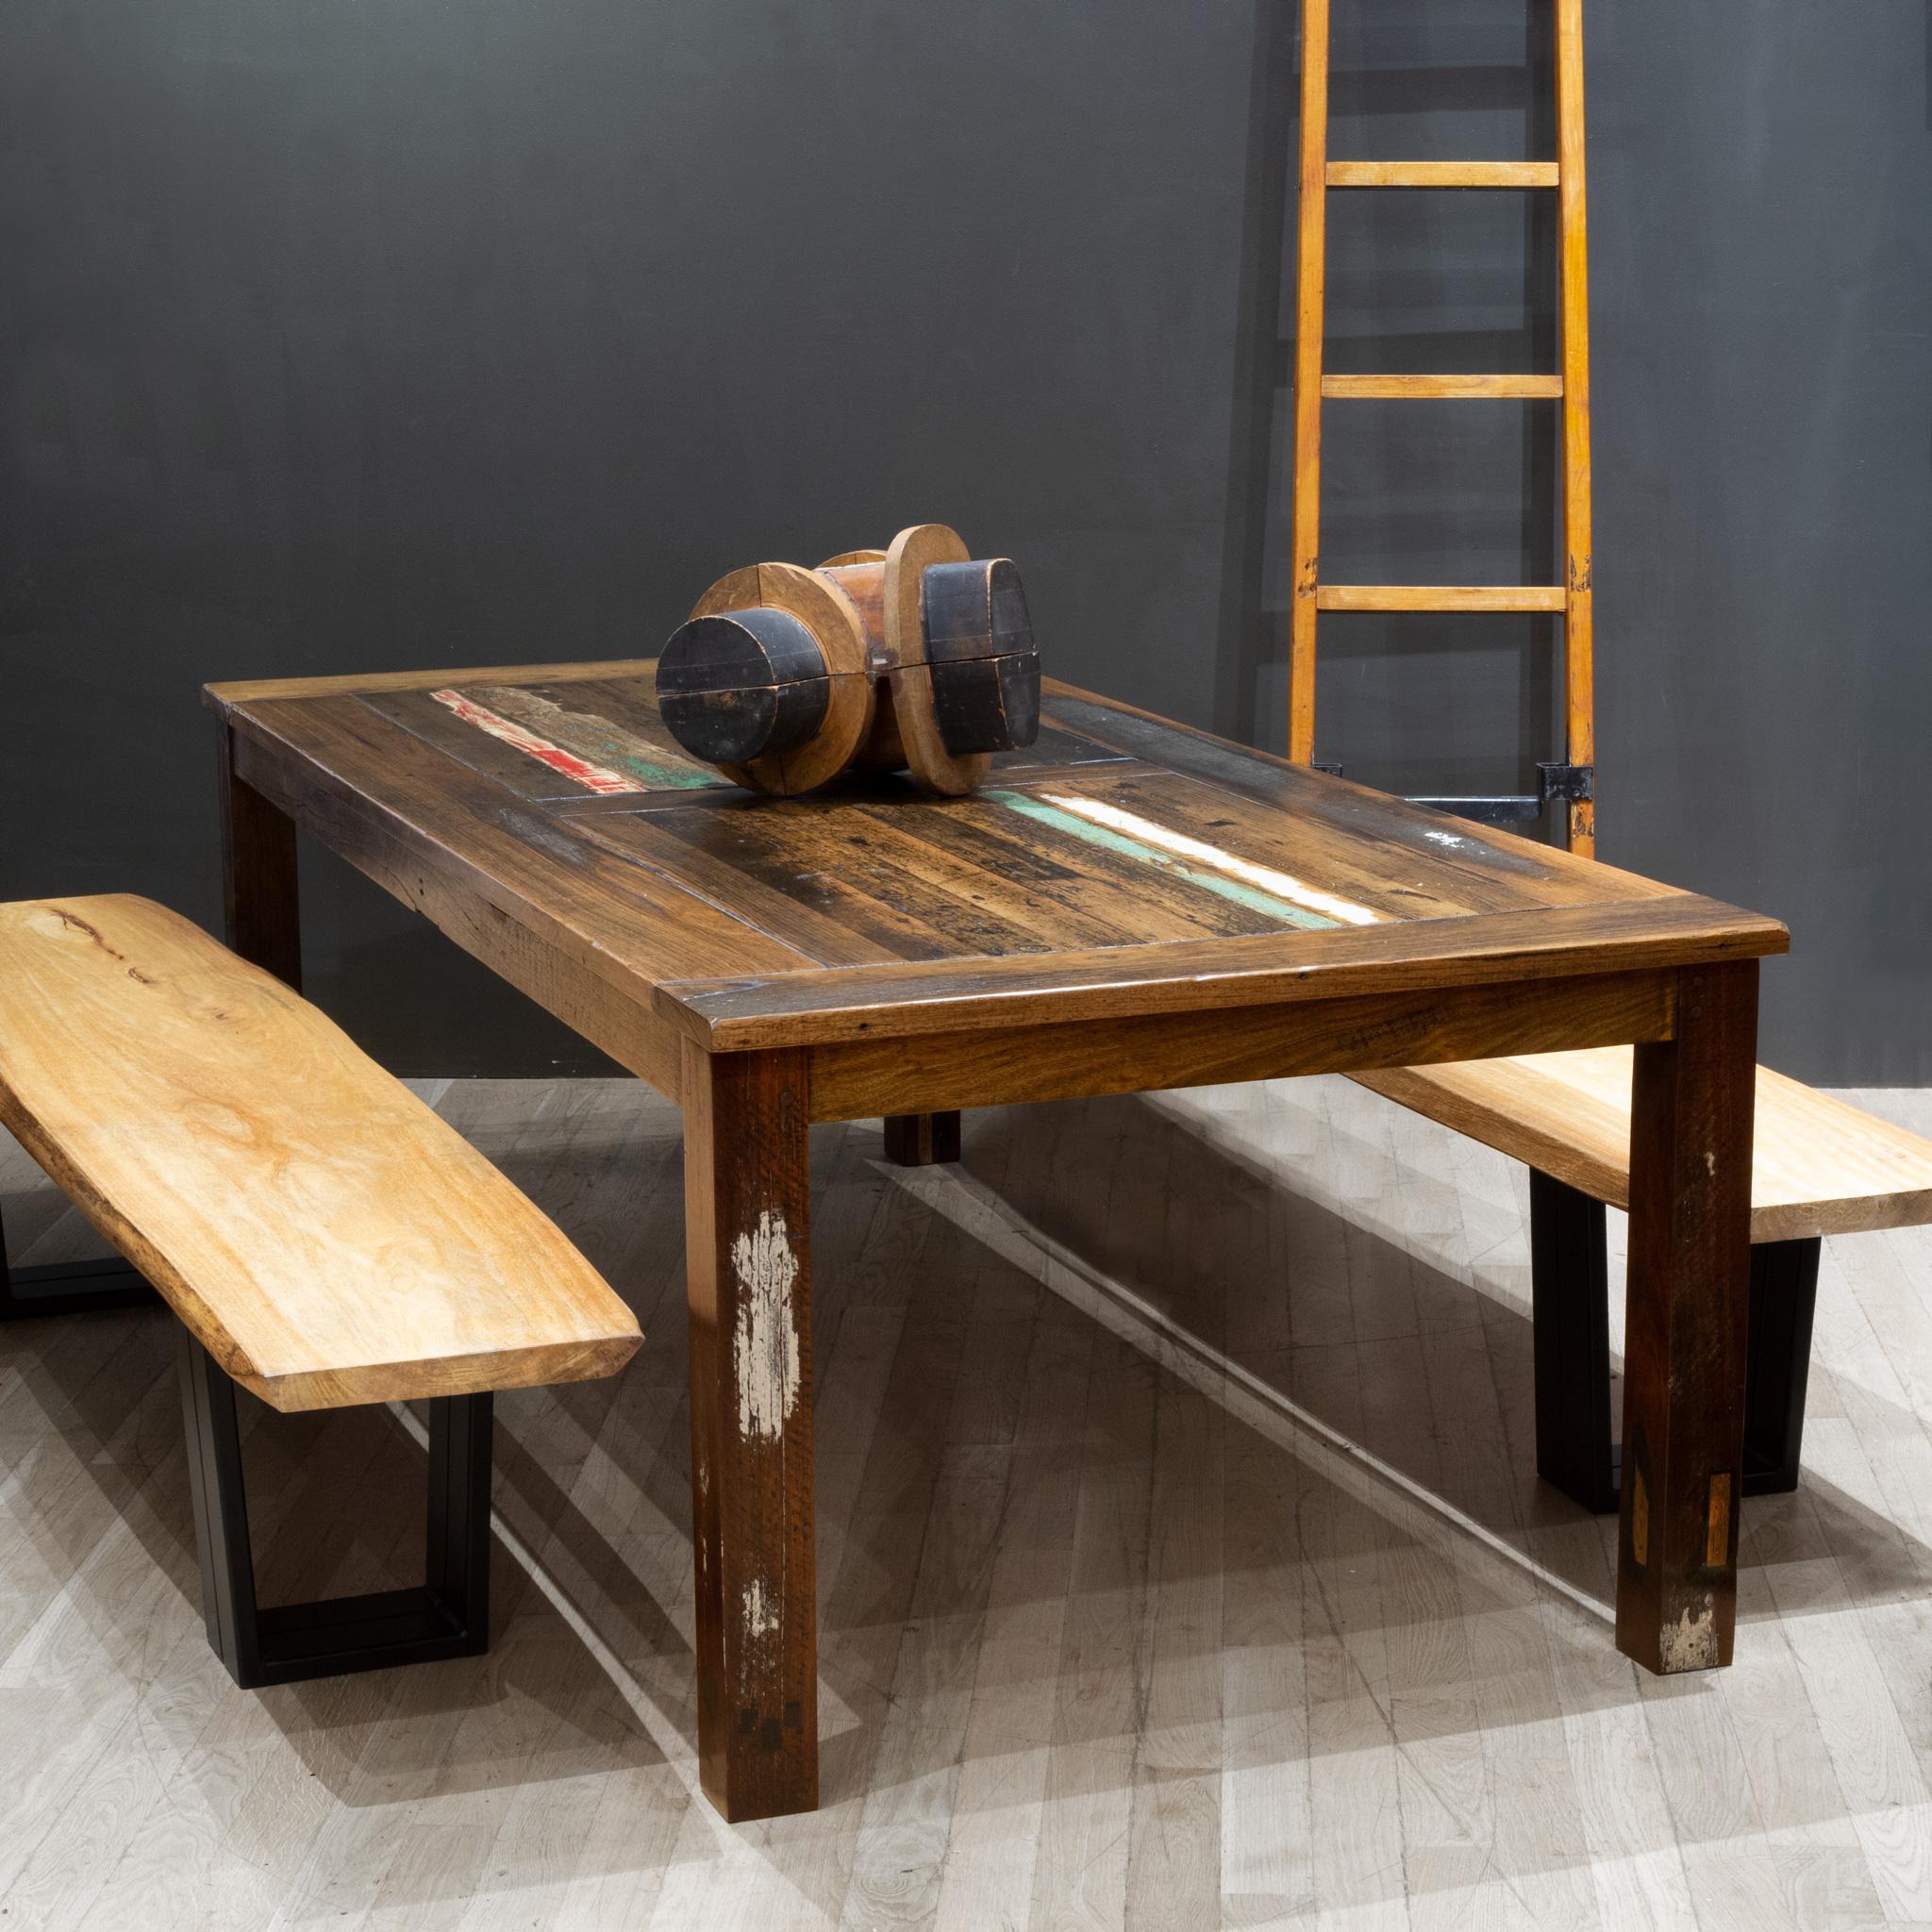 ABOUT

This large custom reclaimed hardwood dining table from Melbourne, Australia is perfect for hosting large gatherings. The classic rustic design is made from a reclaimed cricket door, providing plenty of elegance and a unique character. The